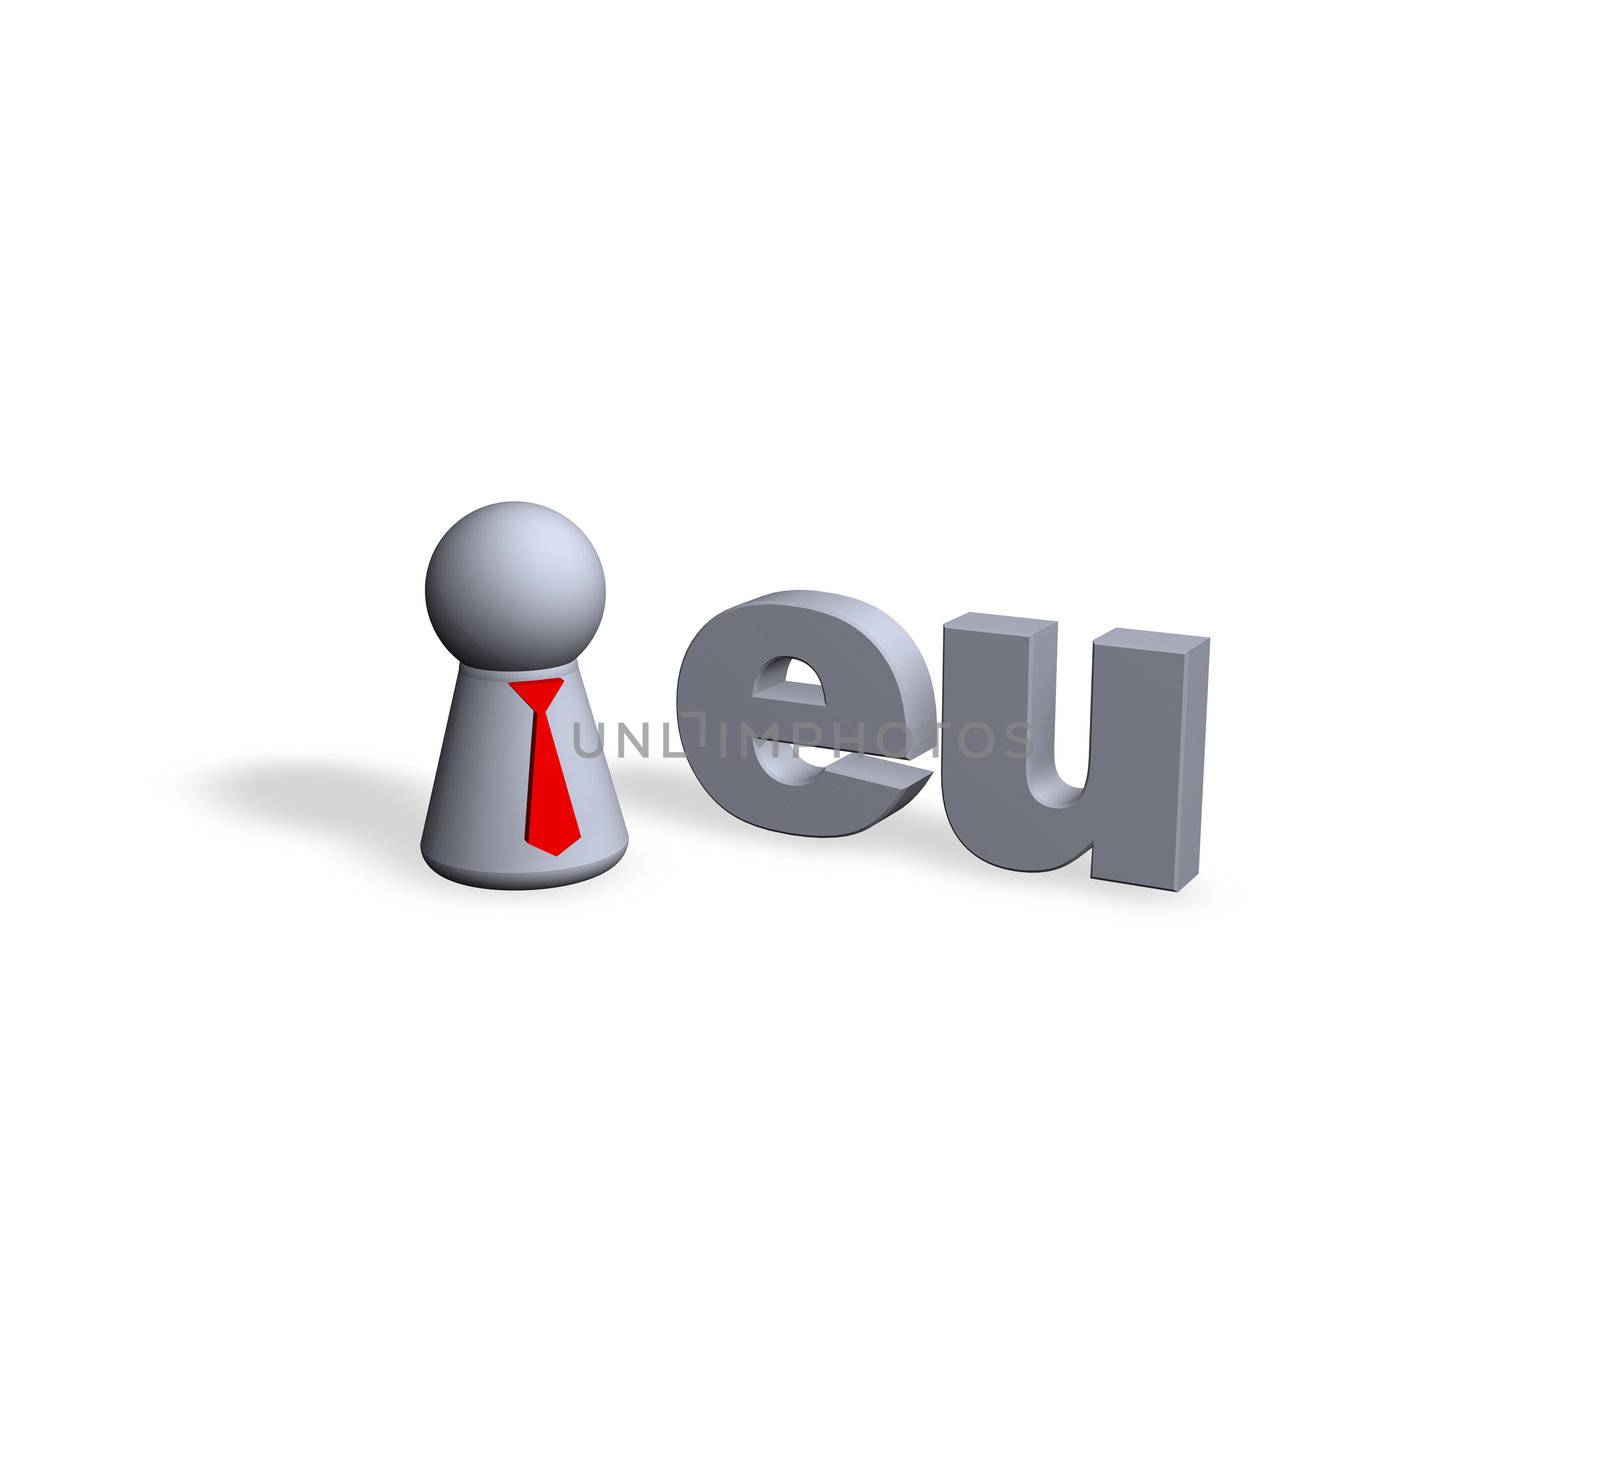 eu text in 3d and play figure with red tie